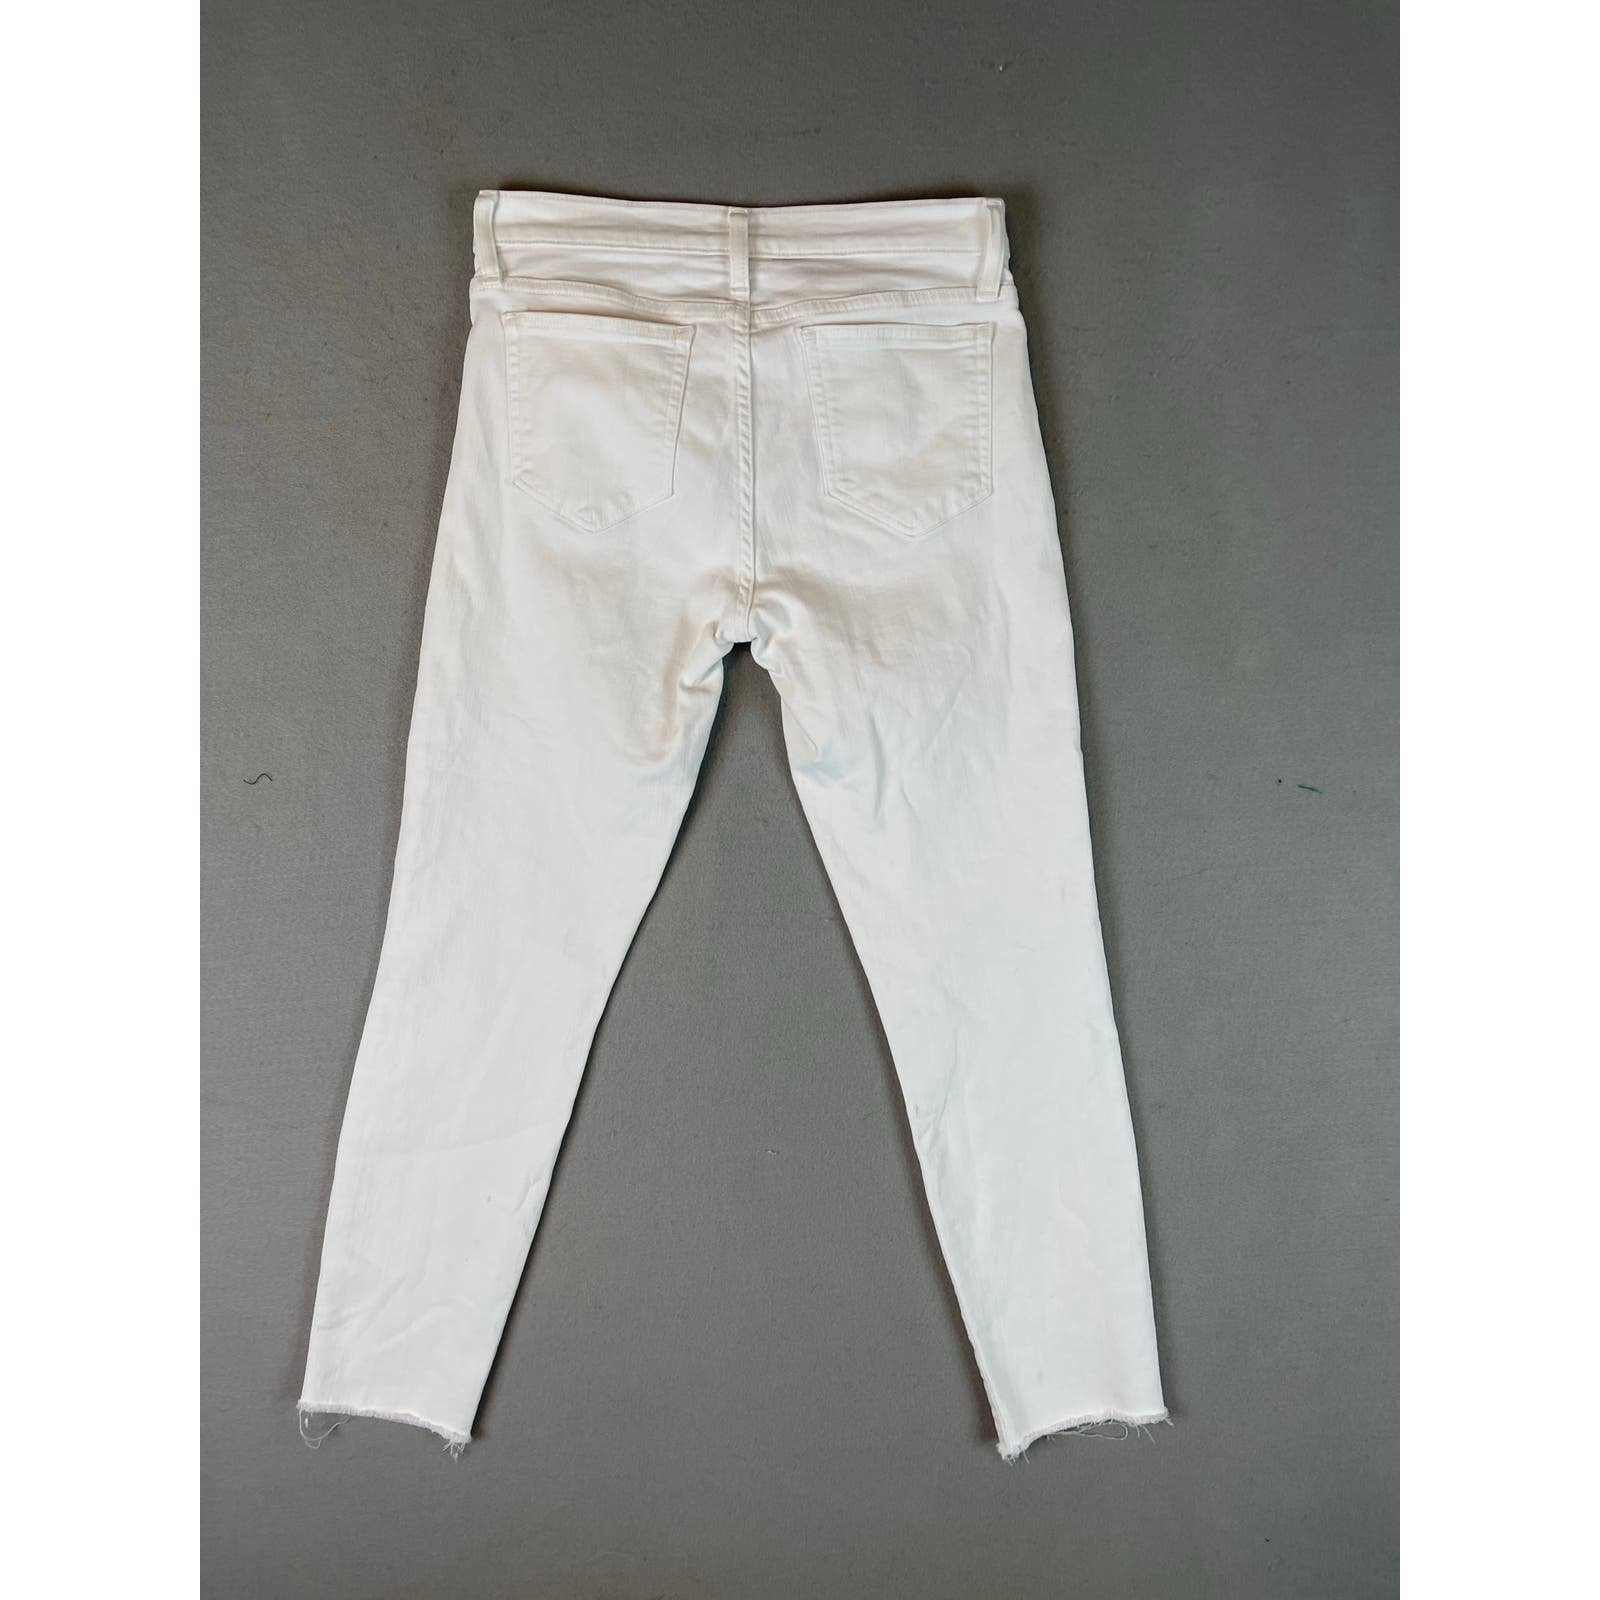 Affordable J. Crew Toothpick Denim Womens 28 White Jeans Ankle Cropped Raw Hem kvprJCy9A just for you